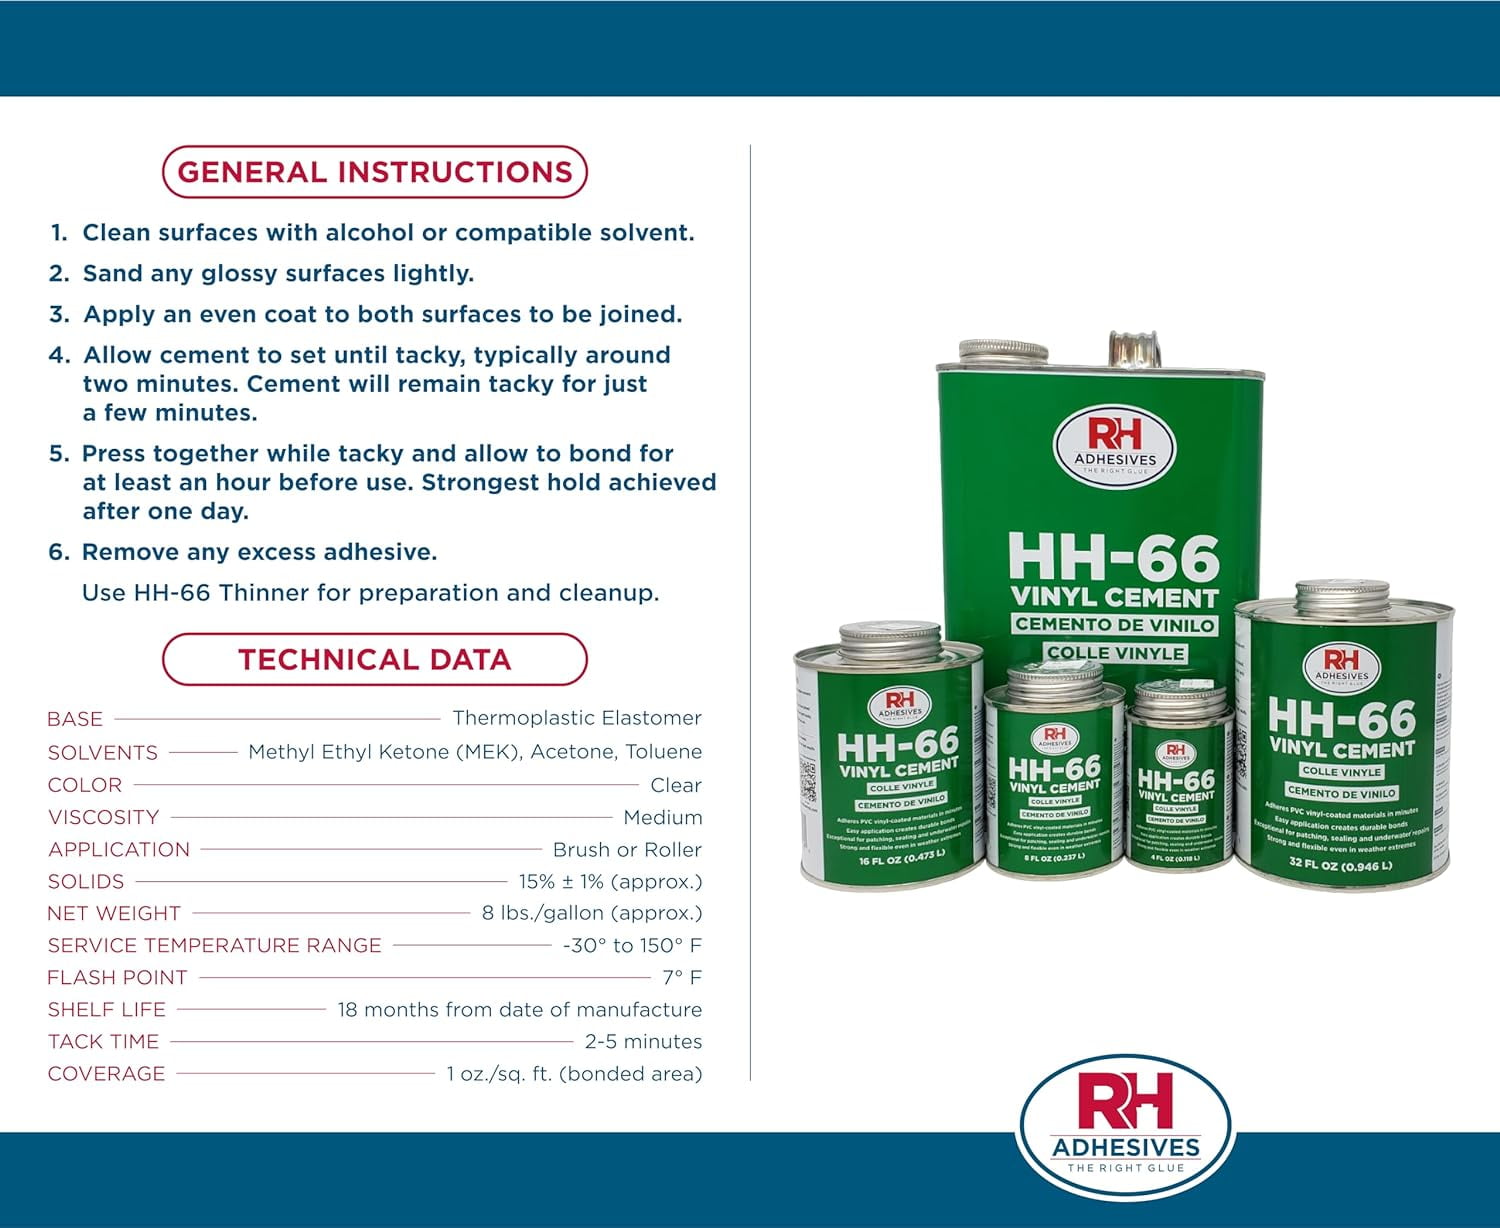 Learn more about HH-66 Vinyl Cement - RH Adhesives